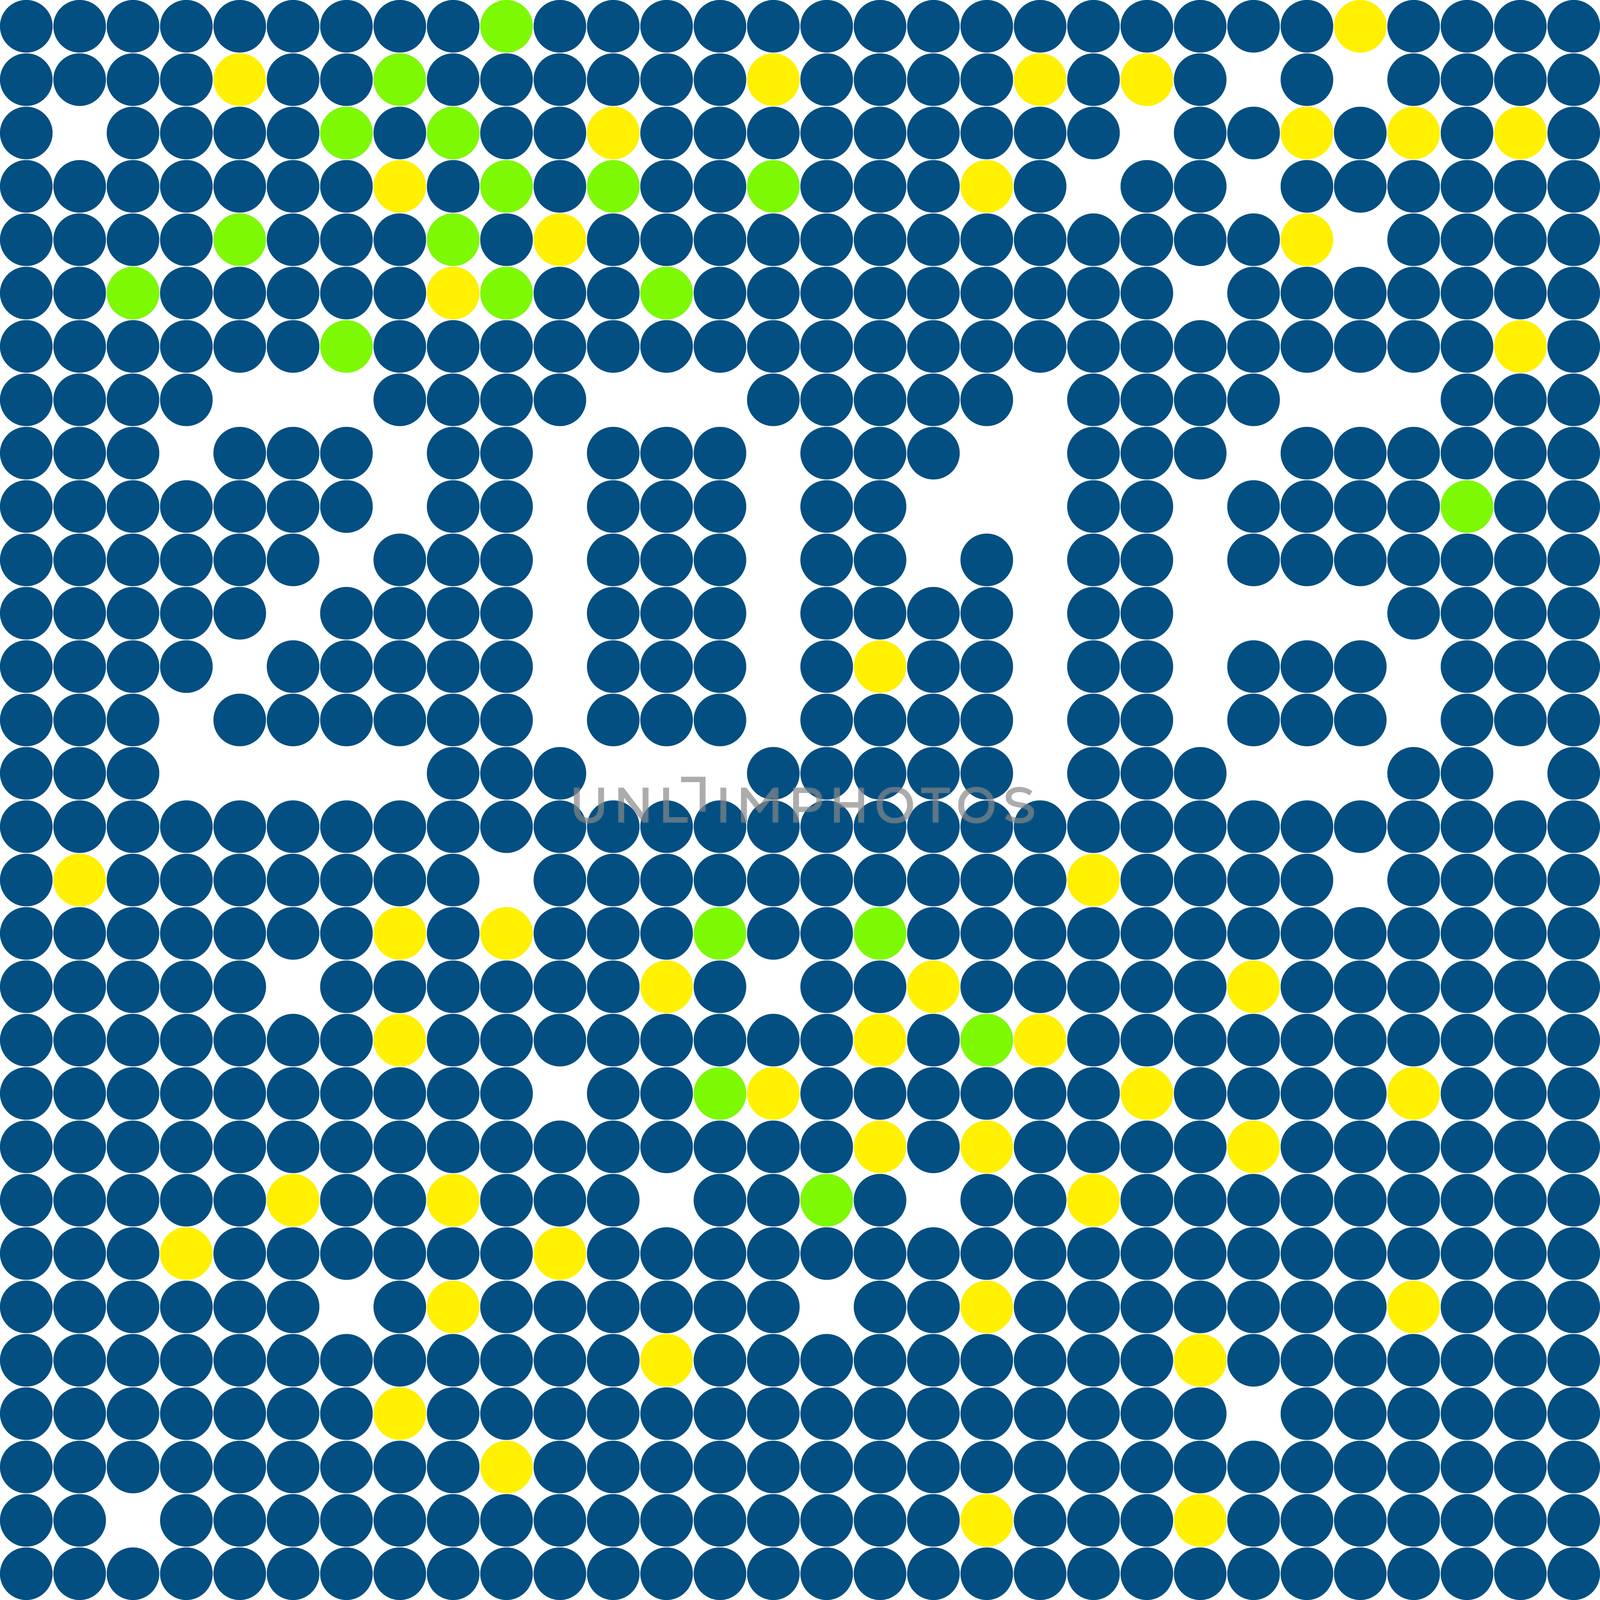 New Year 2016 greetings card, pixel illustration of a scoreboard composition with digital text made of dots